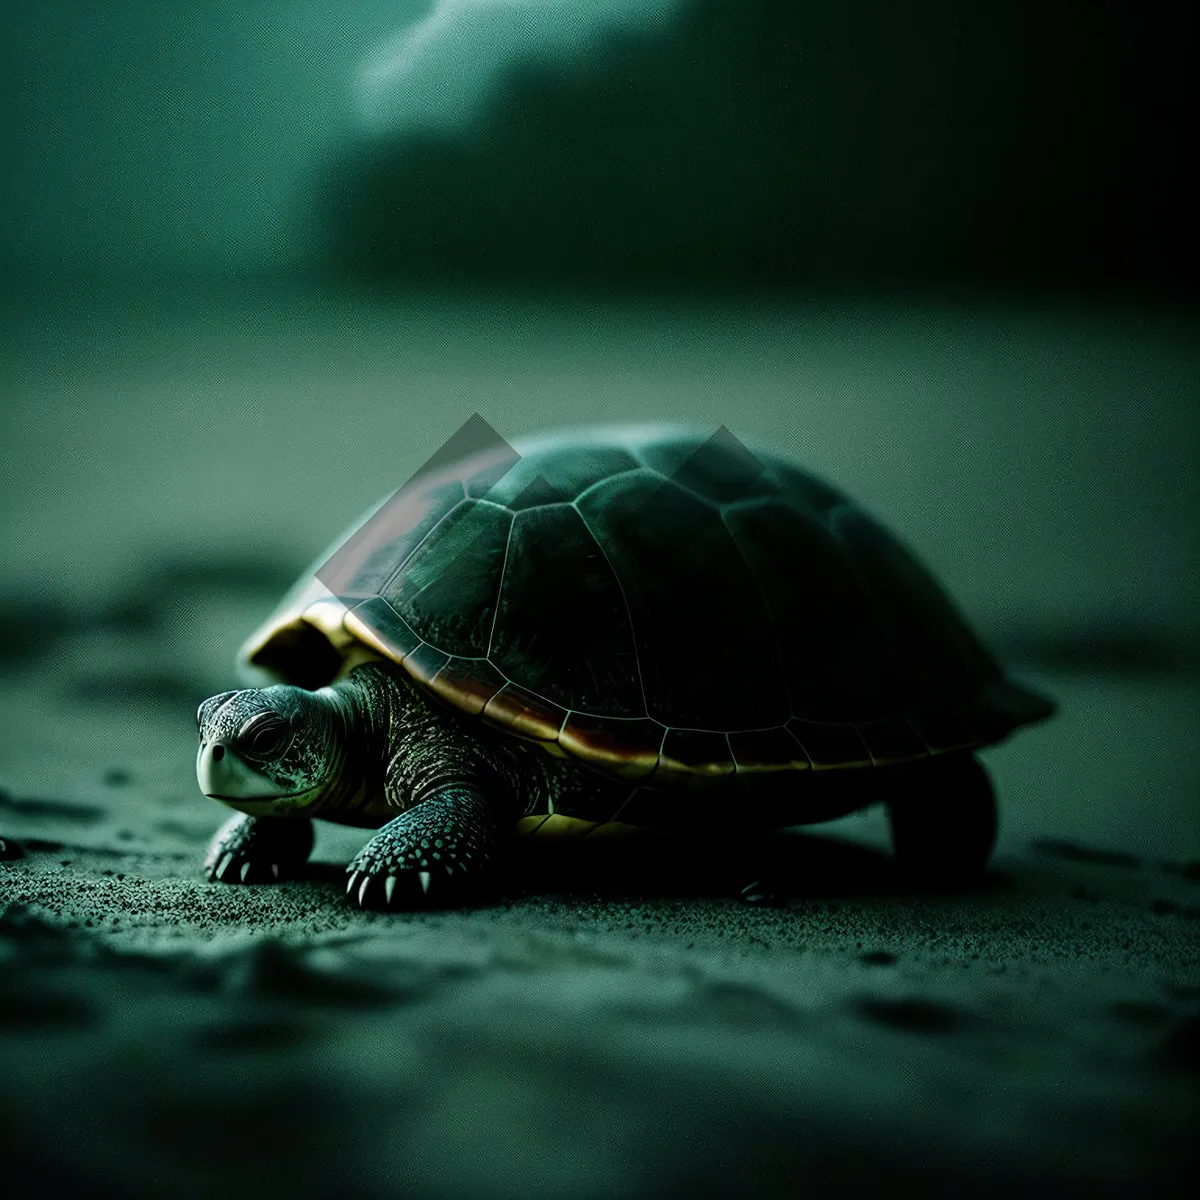 Picture of Terrapin Turtle: Slow-moving Reptile in Mud Shell